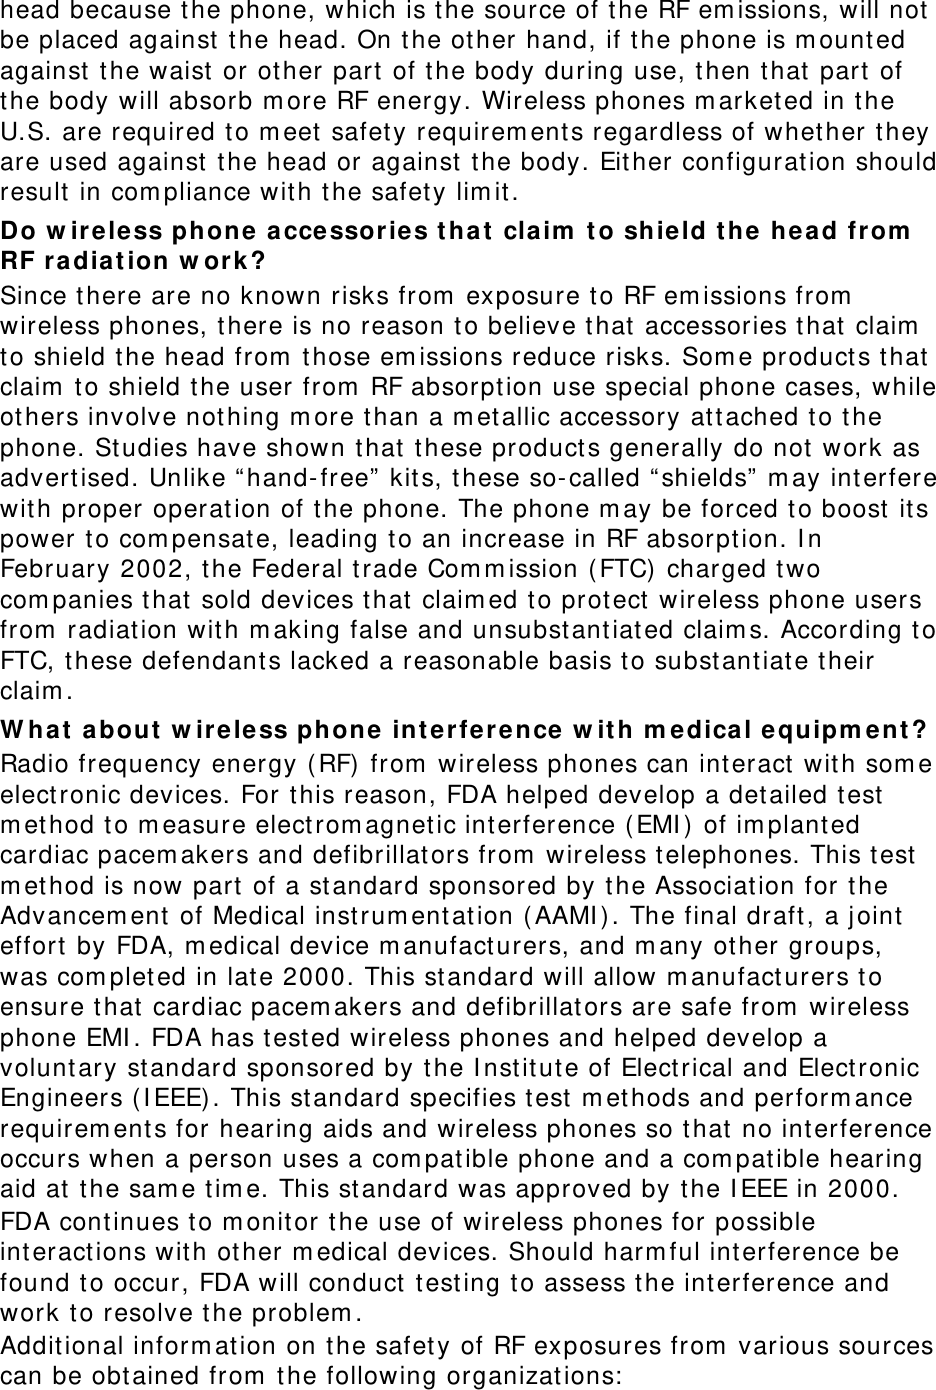 head because the phone, which is t he source of t he RF em issions, will not be placed against  t he head. On t he other hand, if t he phone is m ount ed against  t he waist  or other part of t he body during use, t hen t hat part  of the body will absorb m ore RF energy. Wireless phones m arketed in t he U.S. are required t o m eet  safet y requirem ent s regardless of whet her t hey are used against  t he head or against  the body. Eit her configuration should result in com pliance with t he safet y lim it. Do w ir e less phone  accessories t hat  claim  t o sh ie ld t he he a d from  RF ra dia t ion w ork ? Since there are no known risks from  exposure to RF em issions from  wireless phones, there is no reason t o believe t hat accessories that  claim  to shield the head from  t hose em issions reduce risks. Som e product s t hat claim  t o shield t he user from  RF absorpt ion use special phone cases, while others involve not hing m ore than a m et allic accessory at tached t o t he phone. St udies have shown t hat t hese products generally do not work as advertised. Unlike “ hand- free”  kits, t hese so-called “ shields”  m ay int erfere with proper operation of t he phone. The phone m ay be forced t o boost  its power t o com pensat e, leading to an increase in RF absorption. I n February 2002, t he Federal t rade Com m ission ( FTC) charged t wo com panies t hat sold devices t hat claim ed t o protect  wireless phone users from  radiat ion with m aking false and unsubstantiat ed claim s. According t o FTC, these defendants lacked a reasonable basis t o substantiat e their claim . W hat  a bout  w ir ele ss phone int erference w it h m edica l e quipm ent ? Radio frequency energy ( RF) from  wireless phones can int eract  wit h som e elect ronic devices. For t his reason, FDA helped develop a det ailed test  m et hod t o m easure elect rom agnet ic int erference ( EMI )  of im planted cardiac pacem akers and defibrillators from  wireless t elephones. This t est  m et hod is now part  of a standard sponsored by t he Association for t he Advancem ent of Medical instrum ent ation ( AAMI ) . The final draft, a j oint effort  by FDA, m edical device m anufact urers, and m any other groups, was com plet ed in lat e 2000. This standard will allow m anufact urers t o ensure t hat cardiac pacem akers and defibrillators are safe from  wireless phone EMI . FDA has t est ed wireless phones and helped develop a voluntary st andard sponsored by t he I nstitut e of Electrical and Elect ronic Engineers ( I EEE) . This standard specifies t est m et hods and perform ance requirem ent s for hearing aids and wireless phones so t hat no int erference occurs when a person uses a com pat ible phone and a com pat ible hearing aid at  t he sam e t im e. This st andard was approved by t he I EEE in 2000. FDA continues to m onit or t he use of wireless phones for possible interactions wit h ot her m edical devices. Should harm ful int erference be found t o occur, FDA will conduct t esting t o assess t he interference and work to resolve the problem . Additional inform ation on t he safet y of RF exposures from  various sources can be obtained from  t he following organizat ions:  